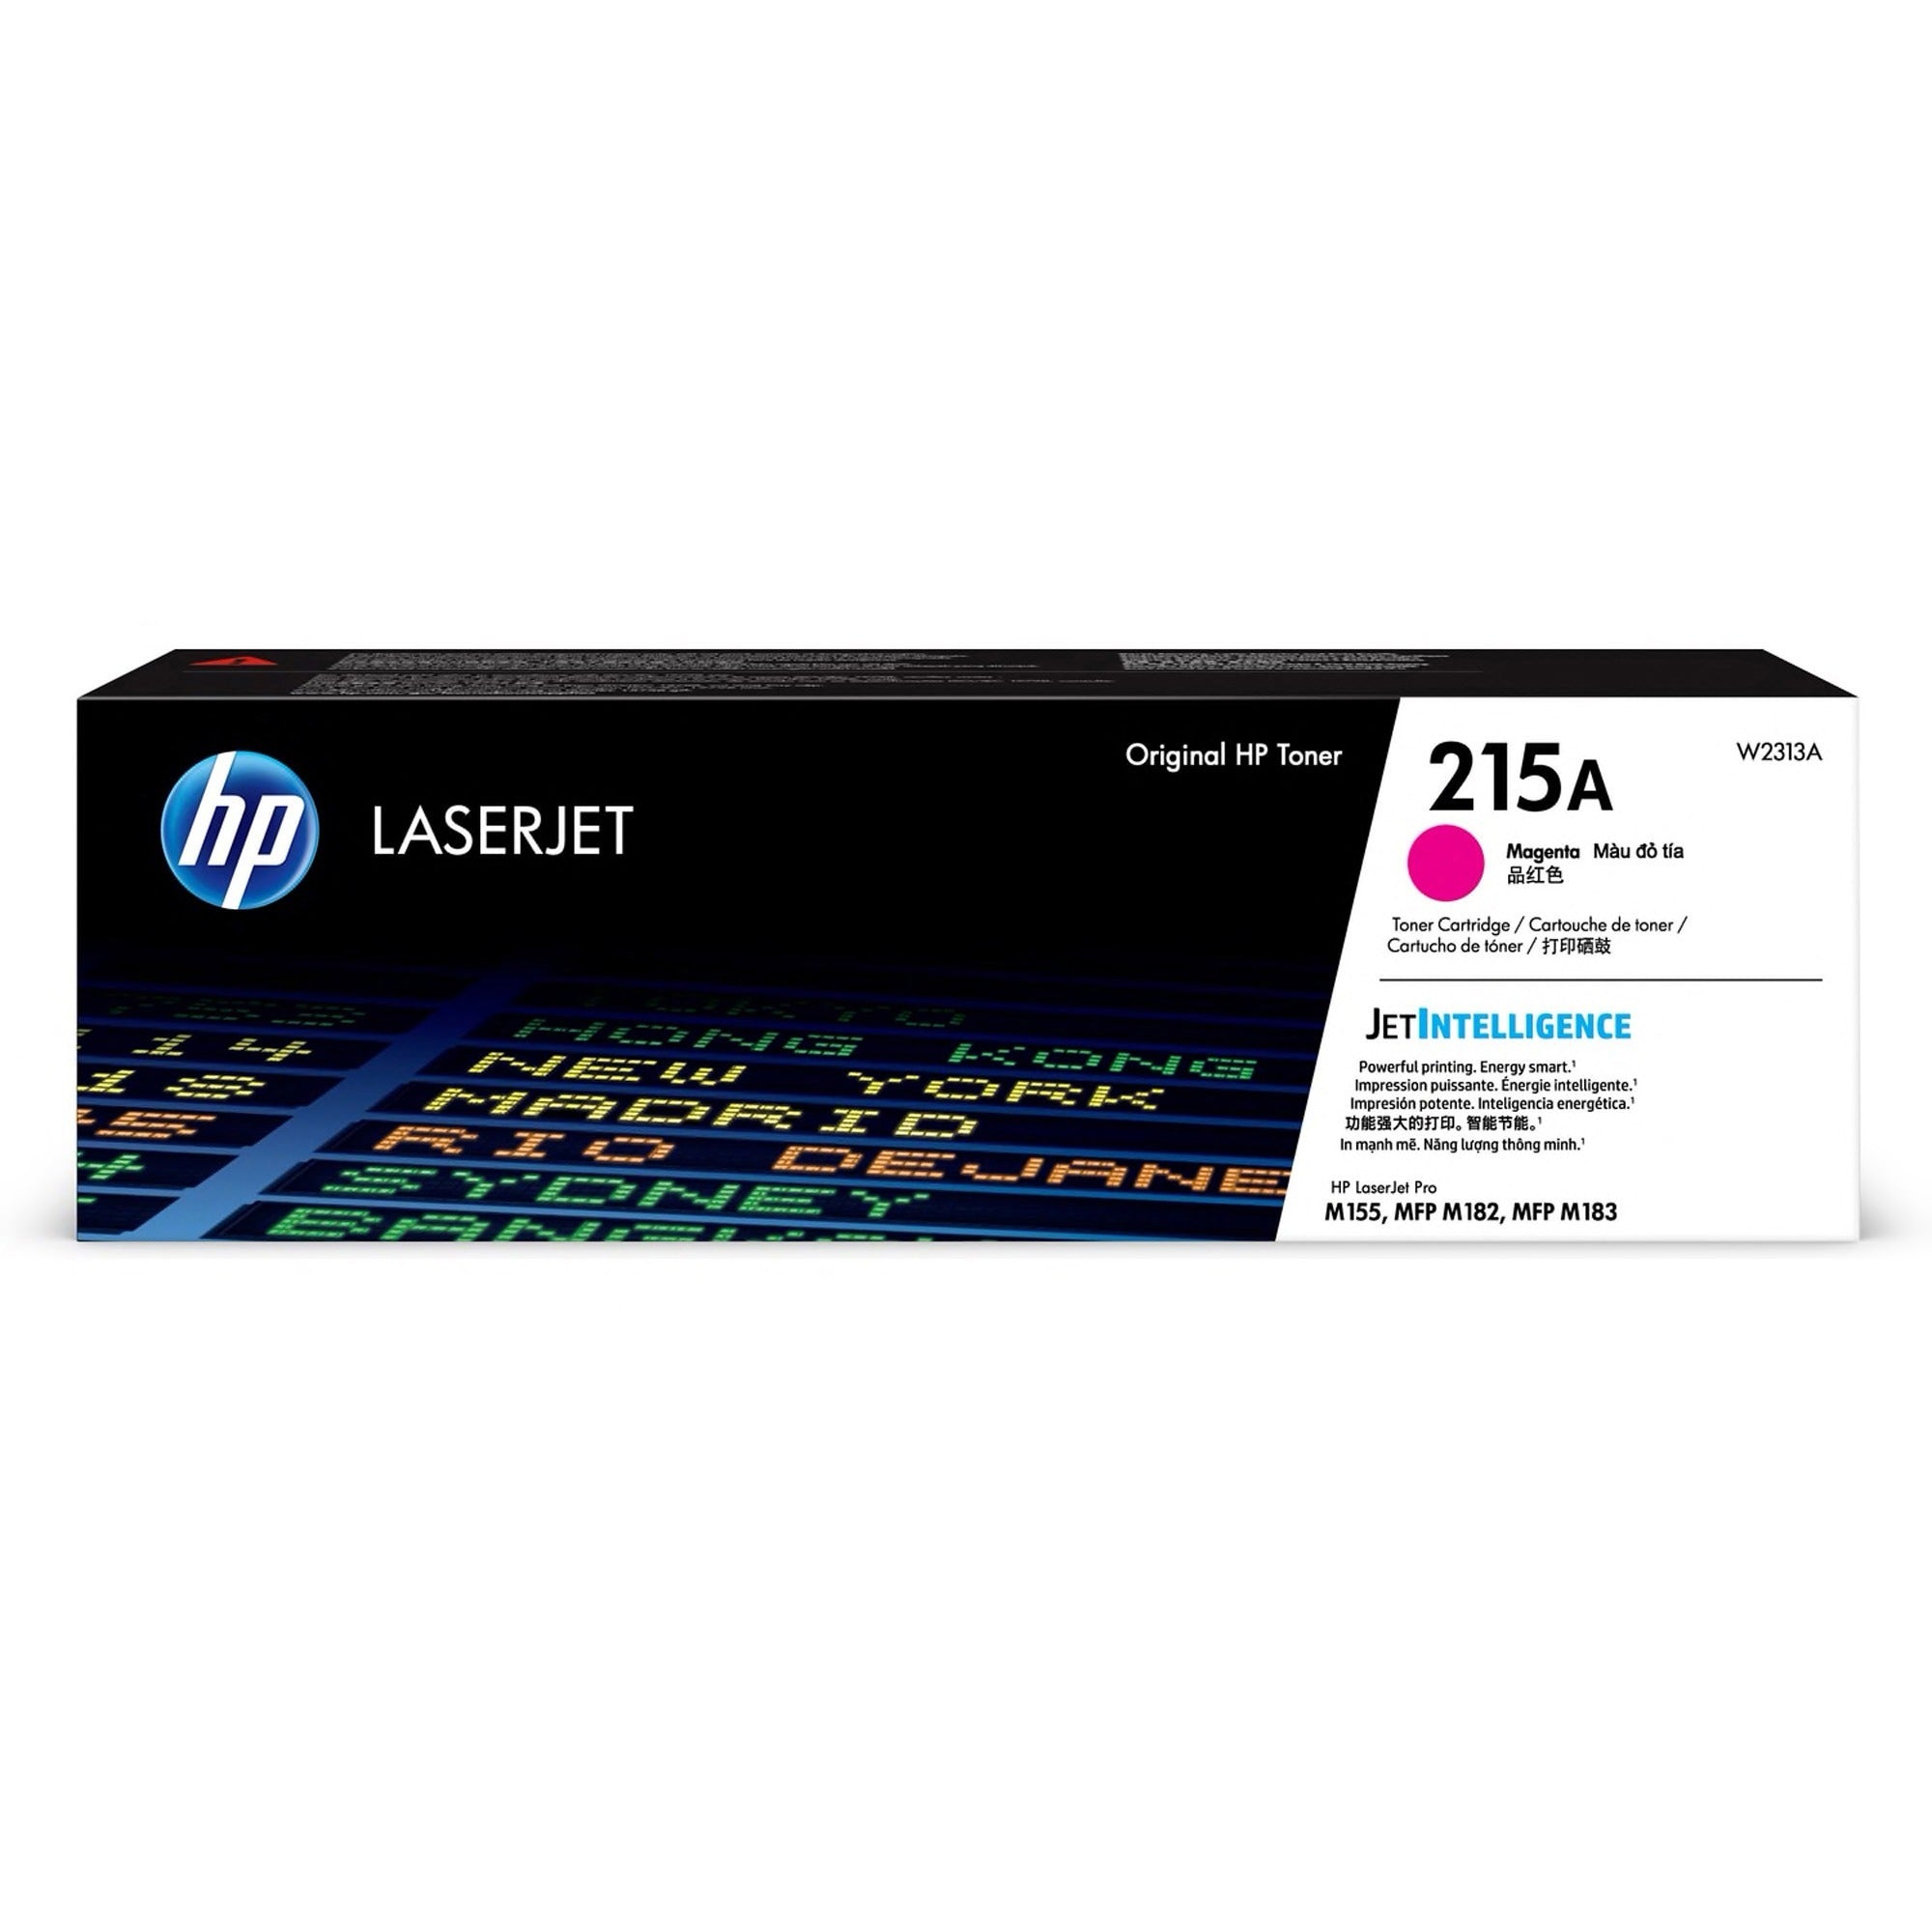 hp-215a-original-standard-yield-laser-toner-cartridge-magenta-1-each-850-pages_heww2313a - 1